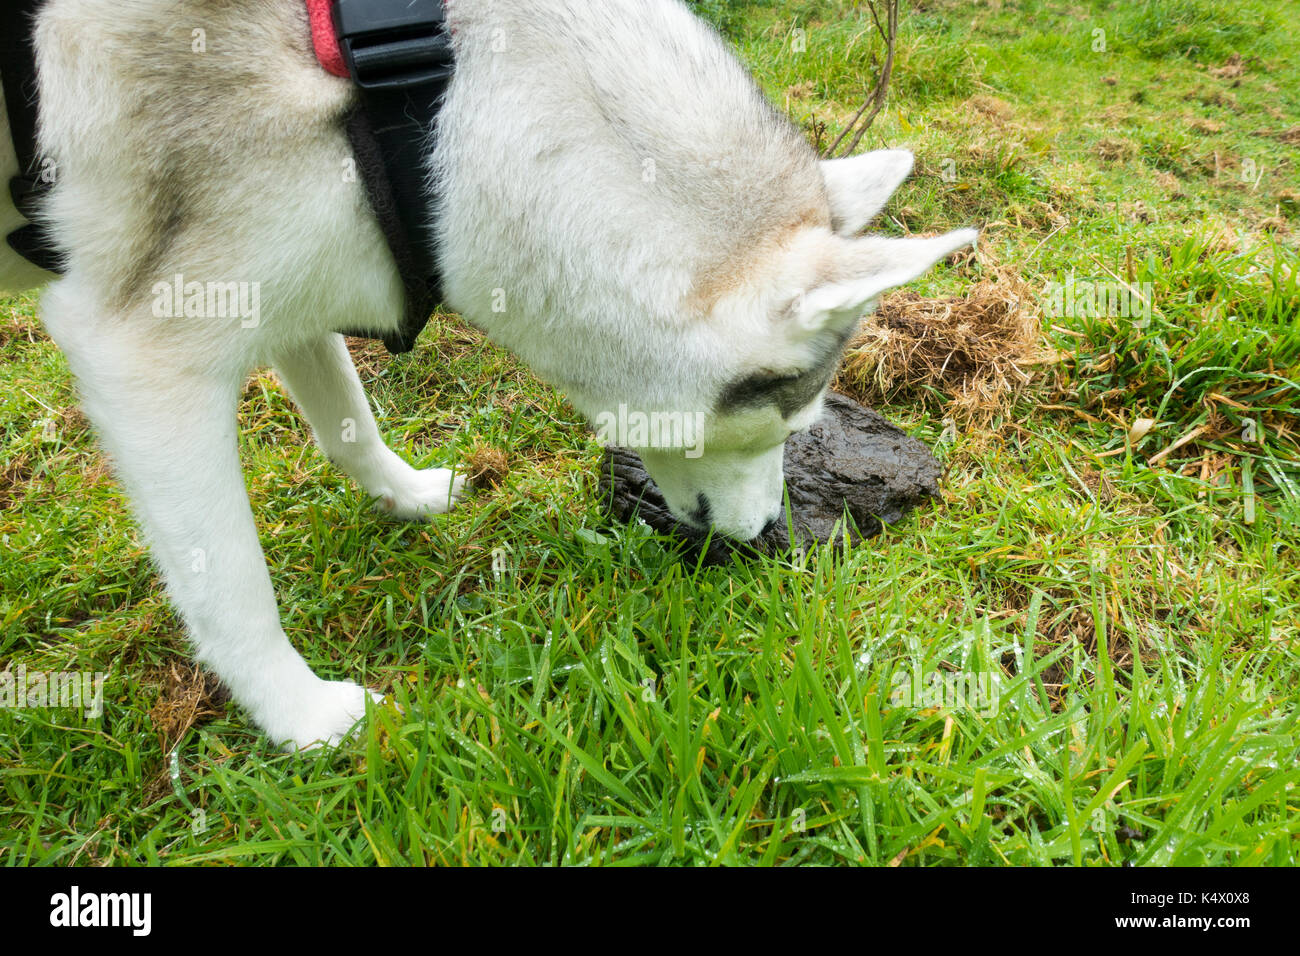 Husky Dog eating and licking cow or horse manure or cow  or horse dung in a field which dogs often eat, Flintshire, Wales, UK Stock Photo